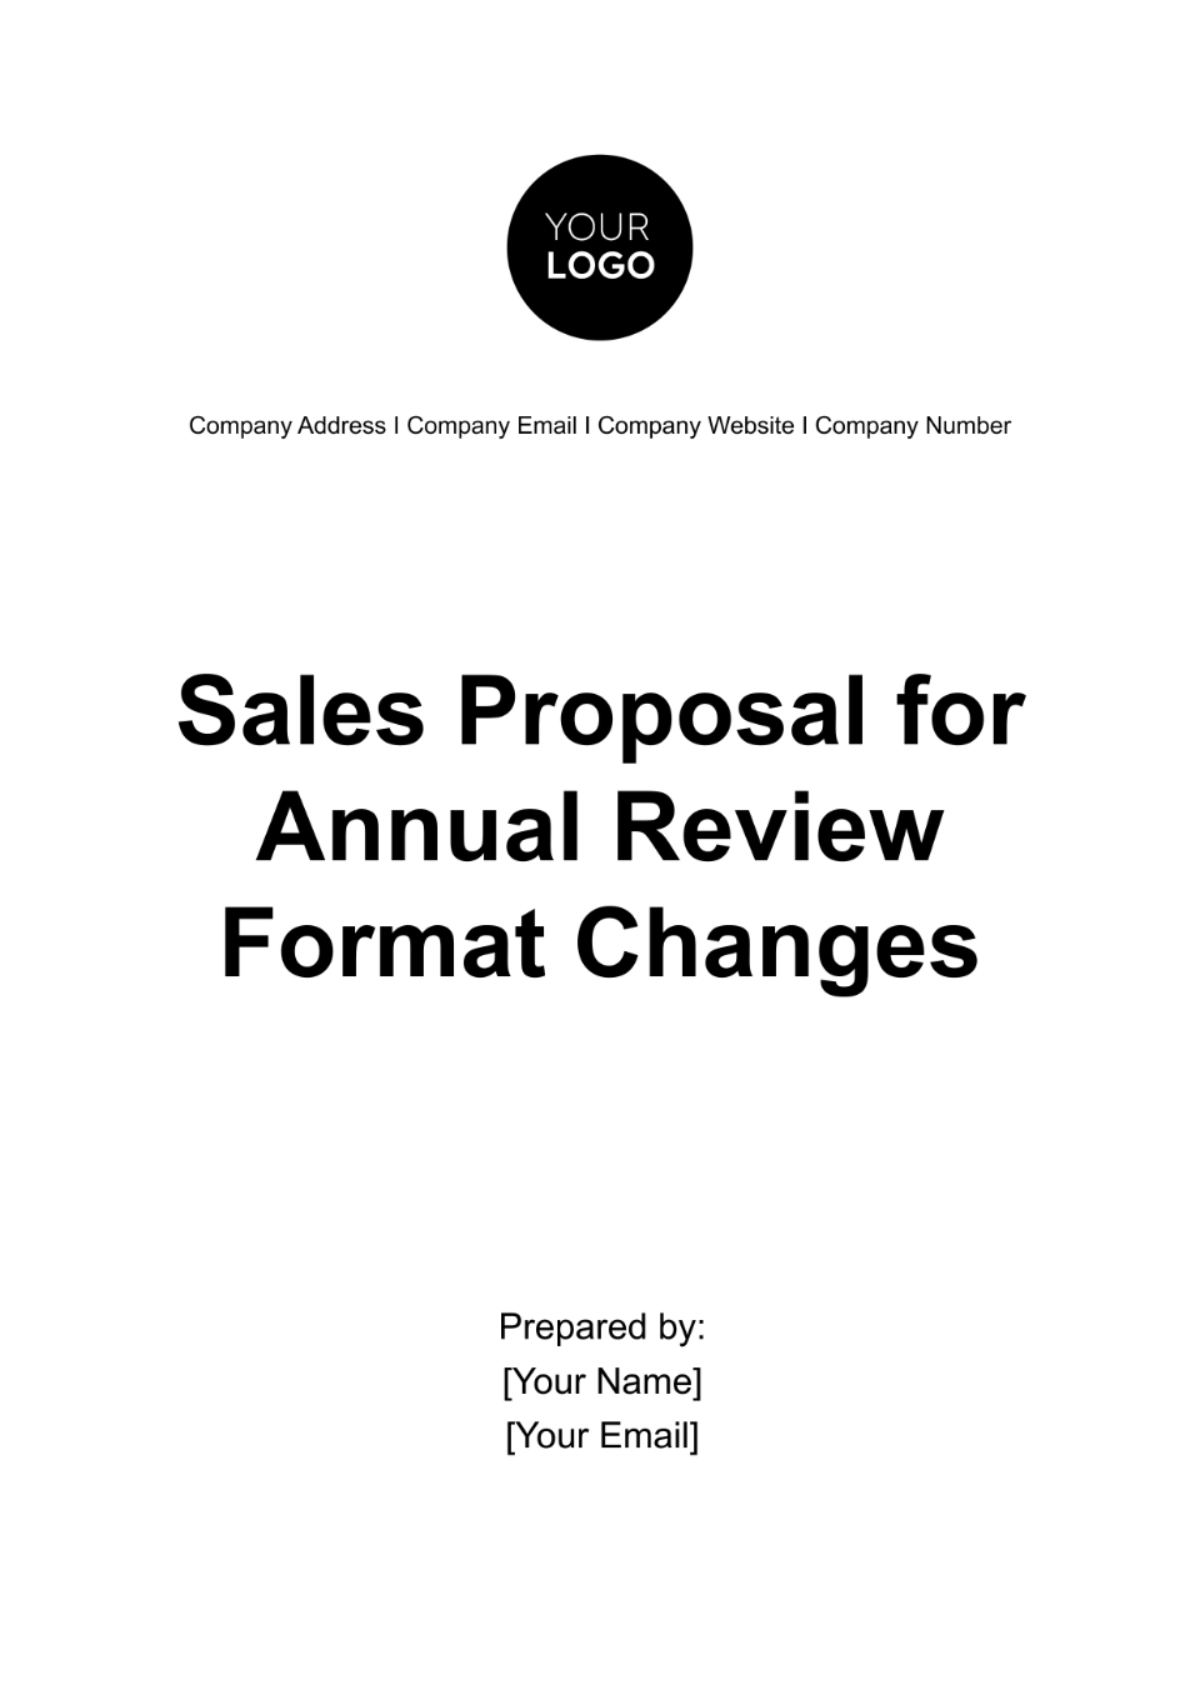 Sales Proposal for Annual Review Format Changes Template